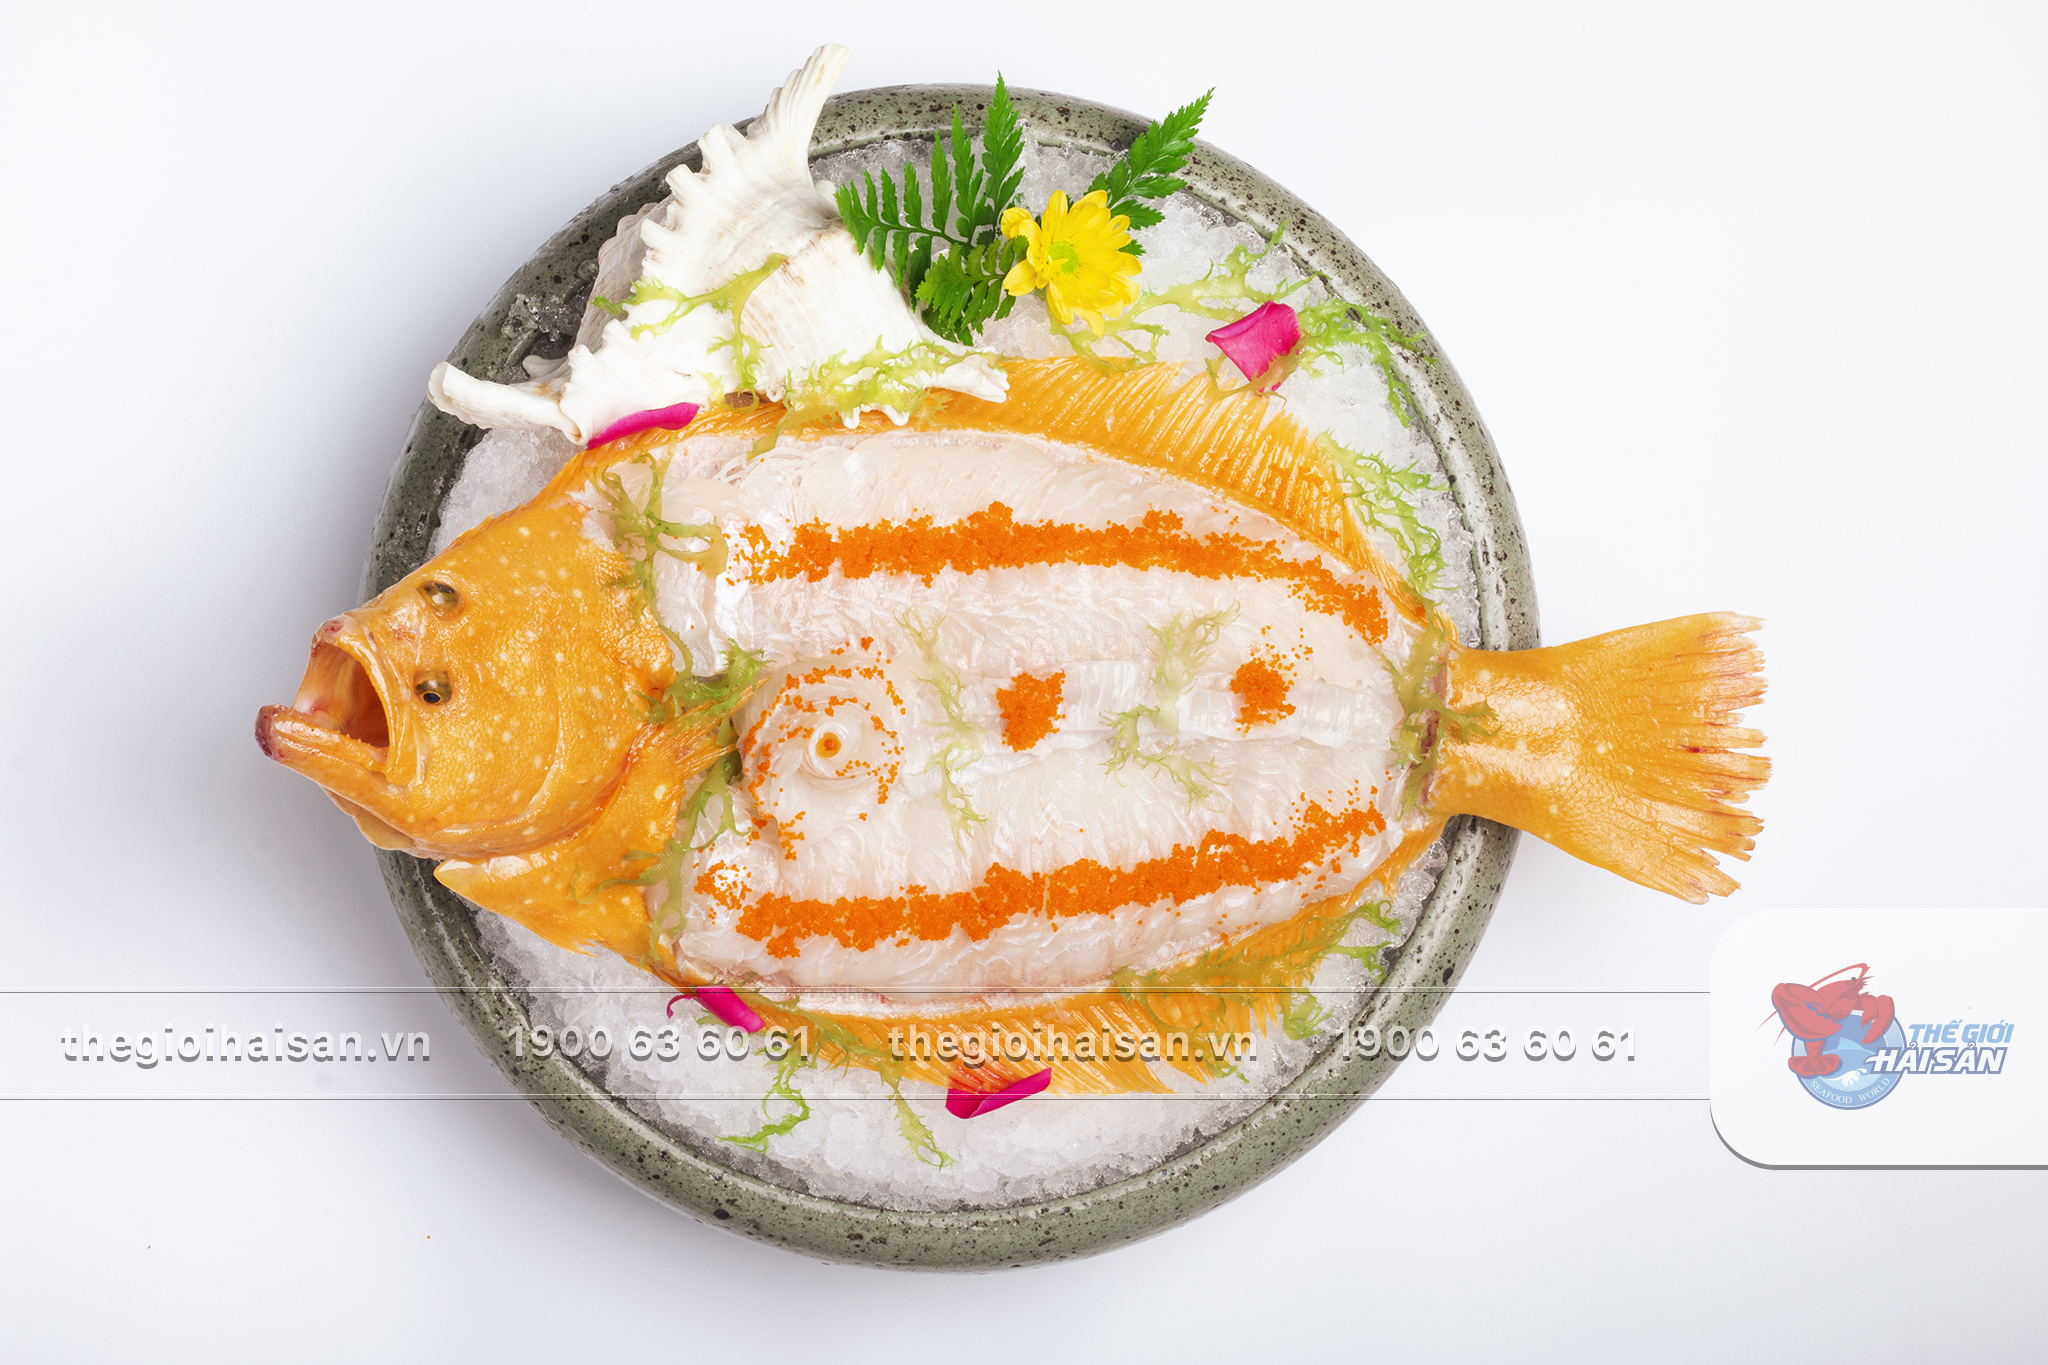 Golden flounder sashimi – One of the most popular dishes at Seafood World